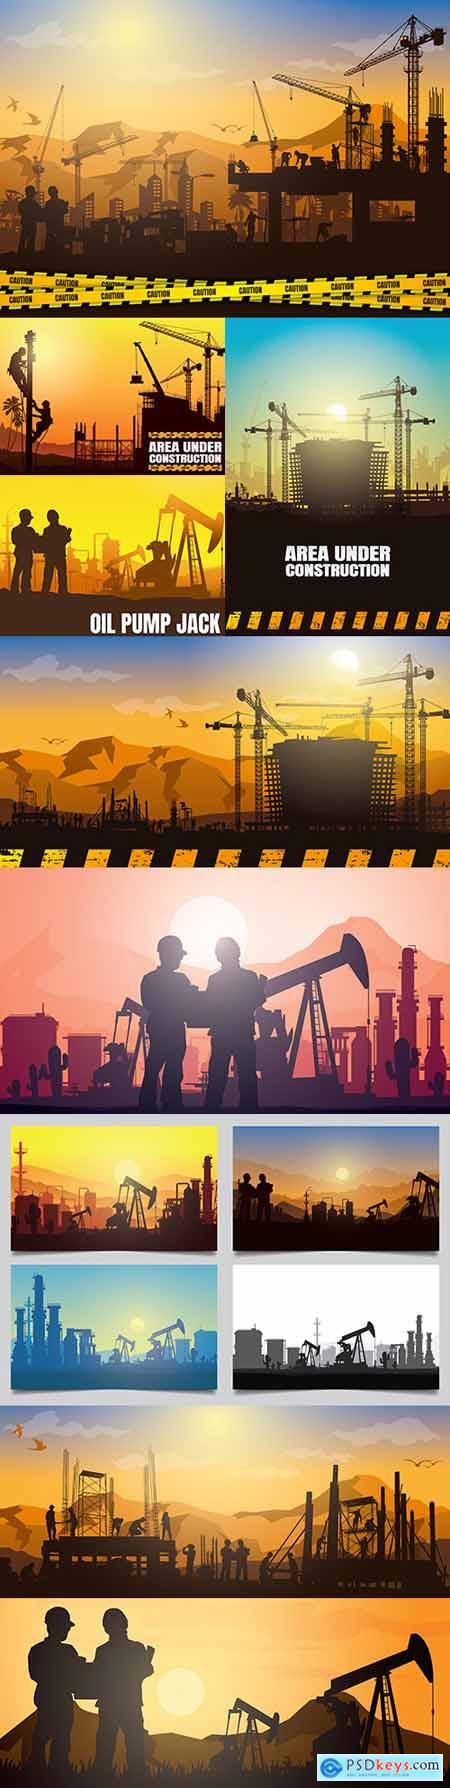 Oil rig and industry silhouettes background illustration